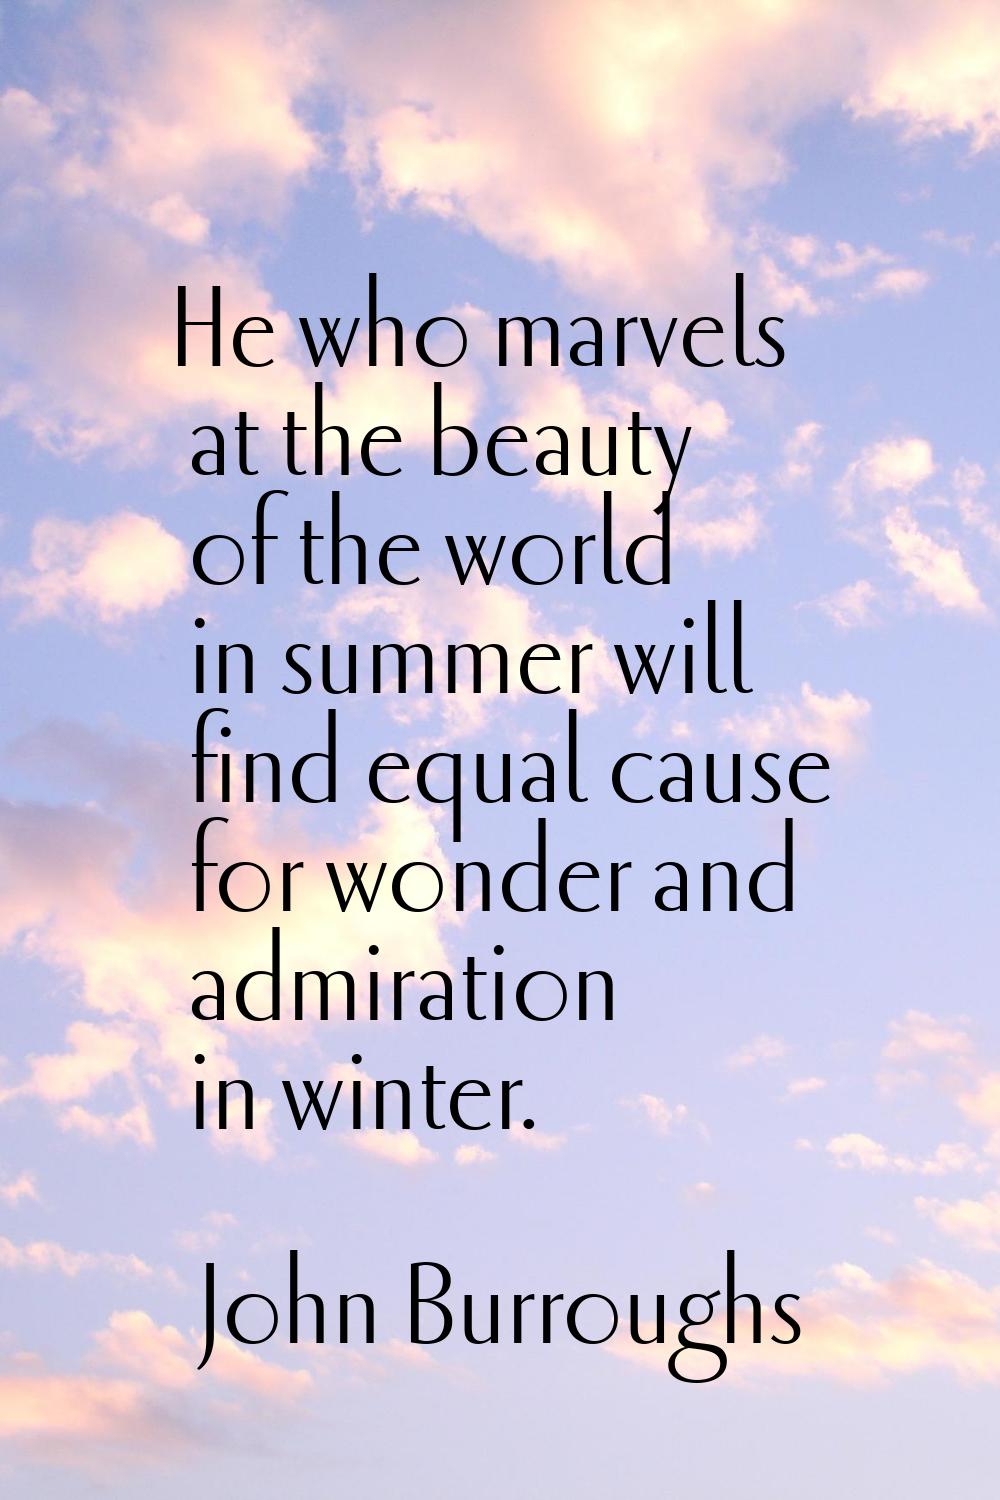 He who marvels at the beauty of the world in summer will find equal cause for wonder and admiration